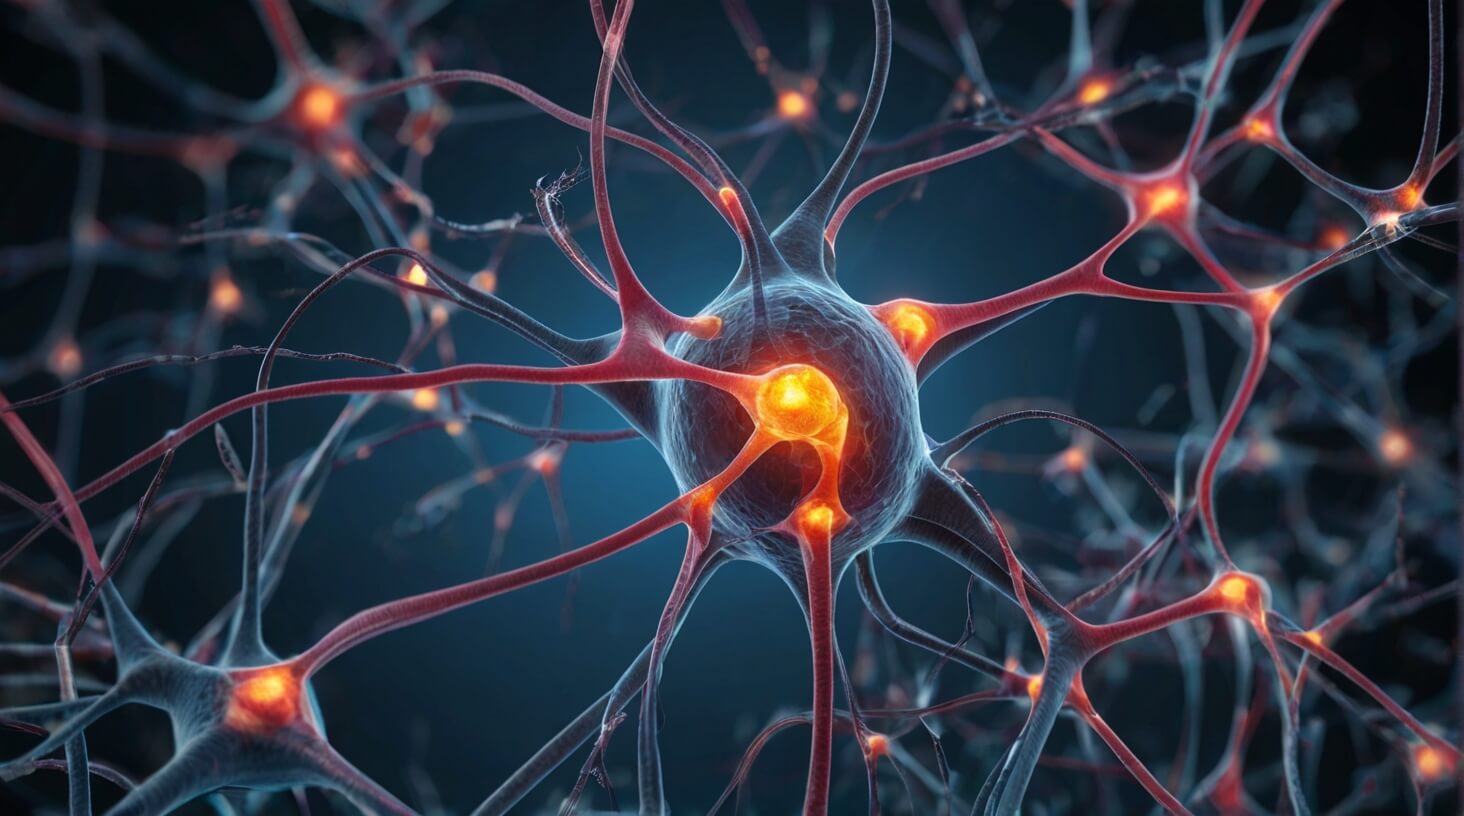 Abstract image showcasing interconnected neural pathways, representing the complex web of neurological diseases and their connections.